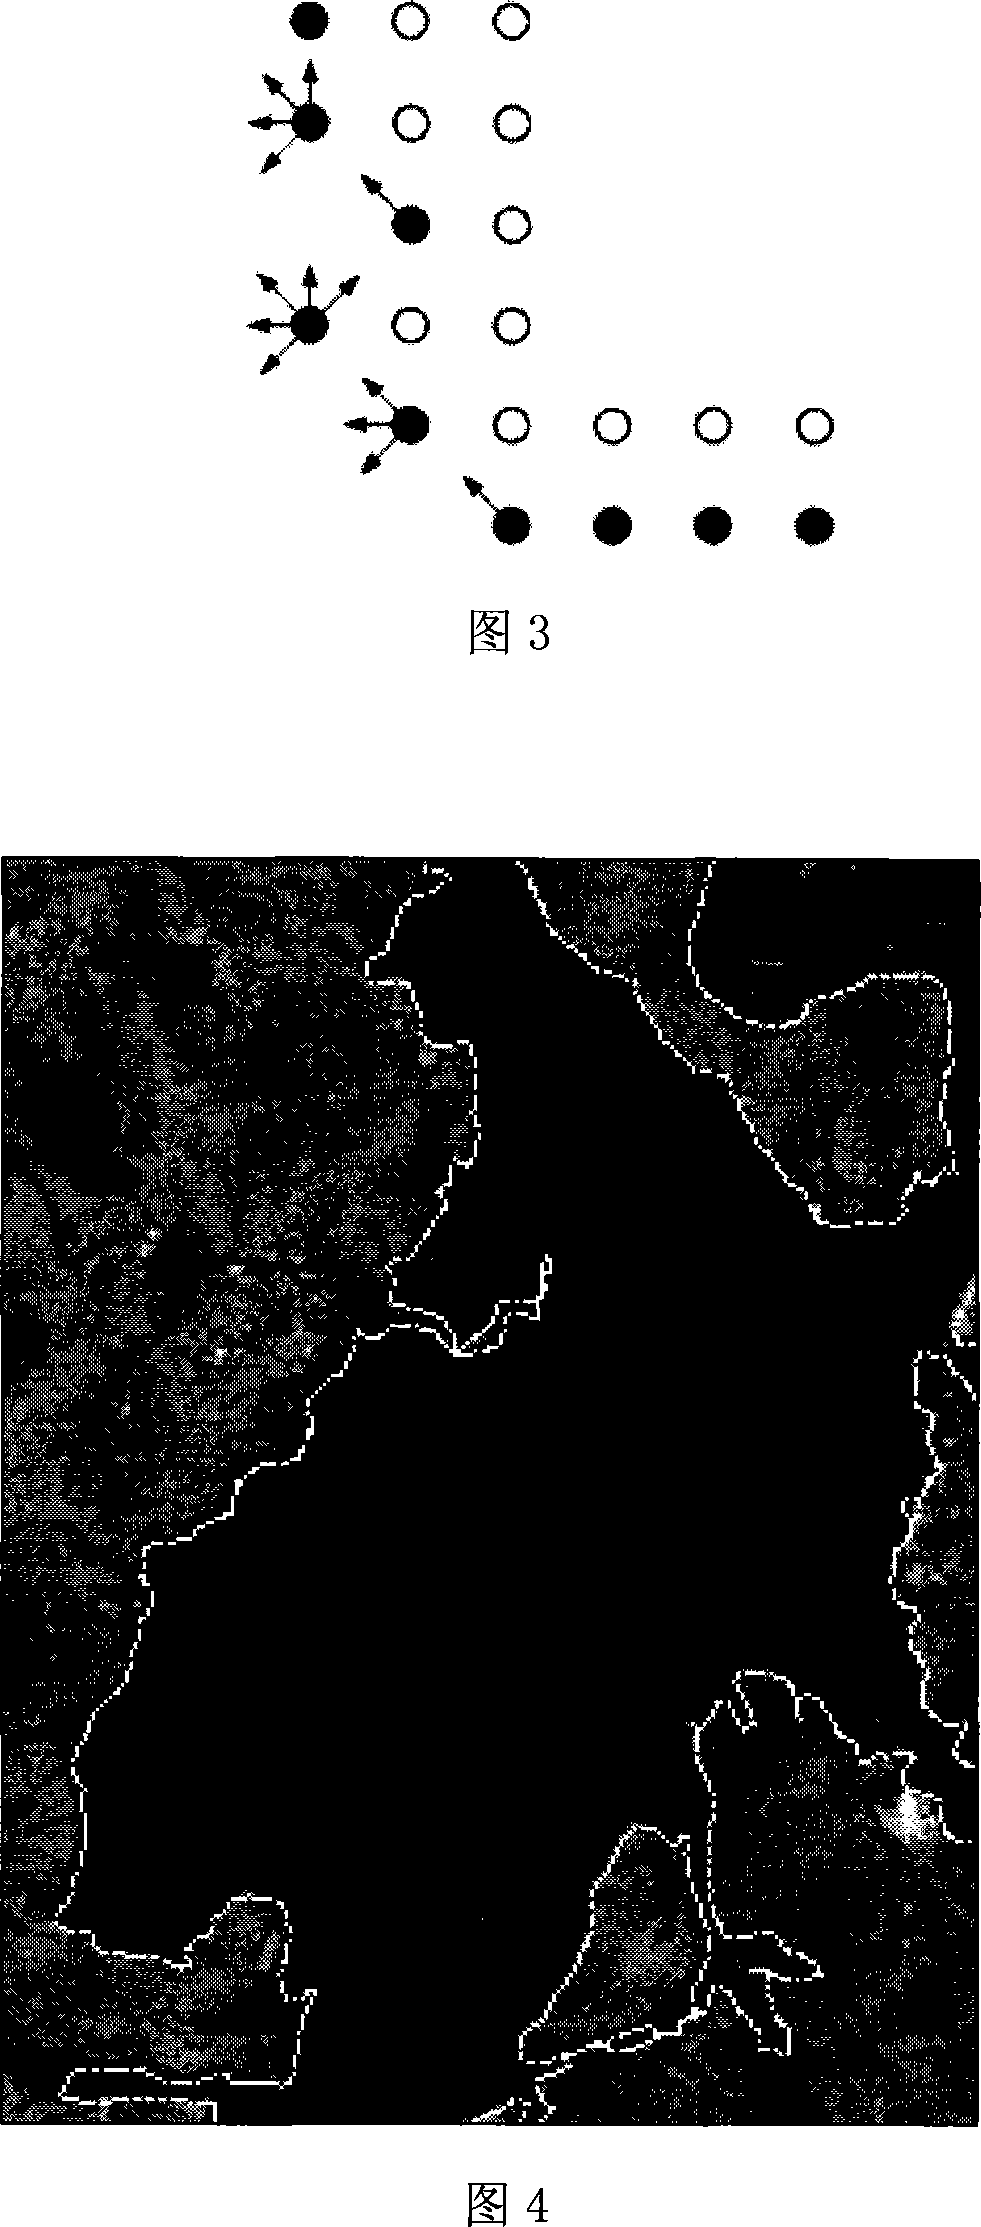 Method for detecting lakeshore and extracting lake profile from SAR image